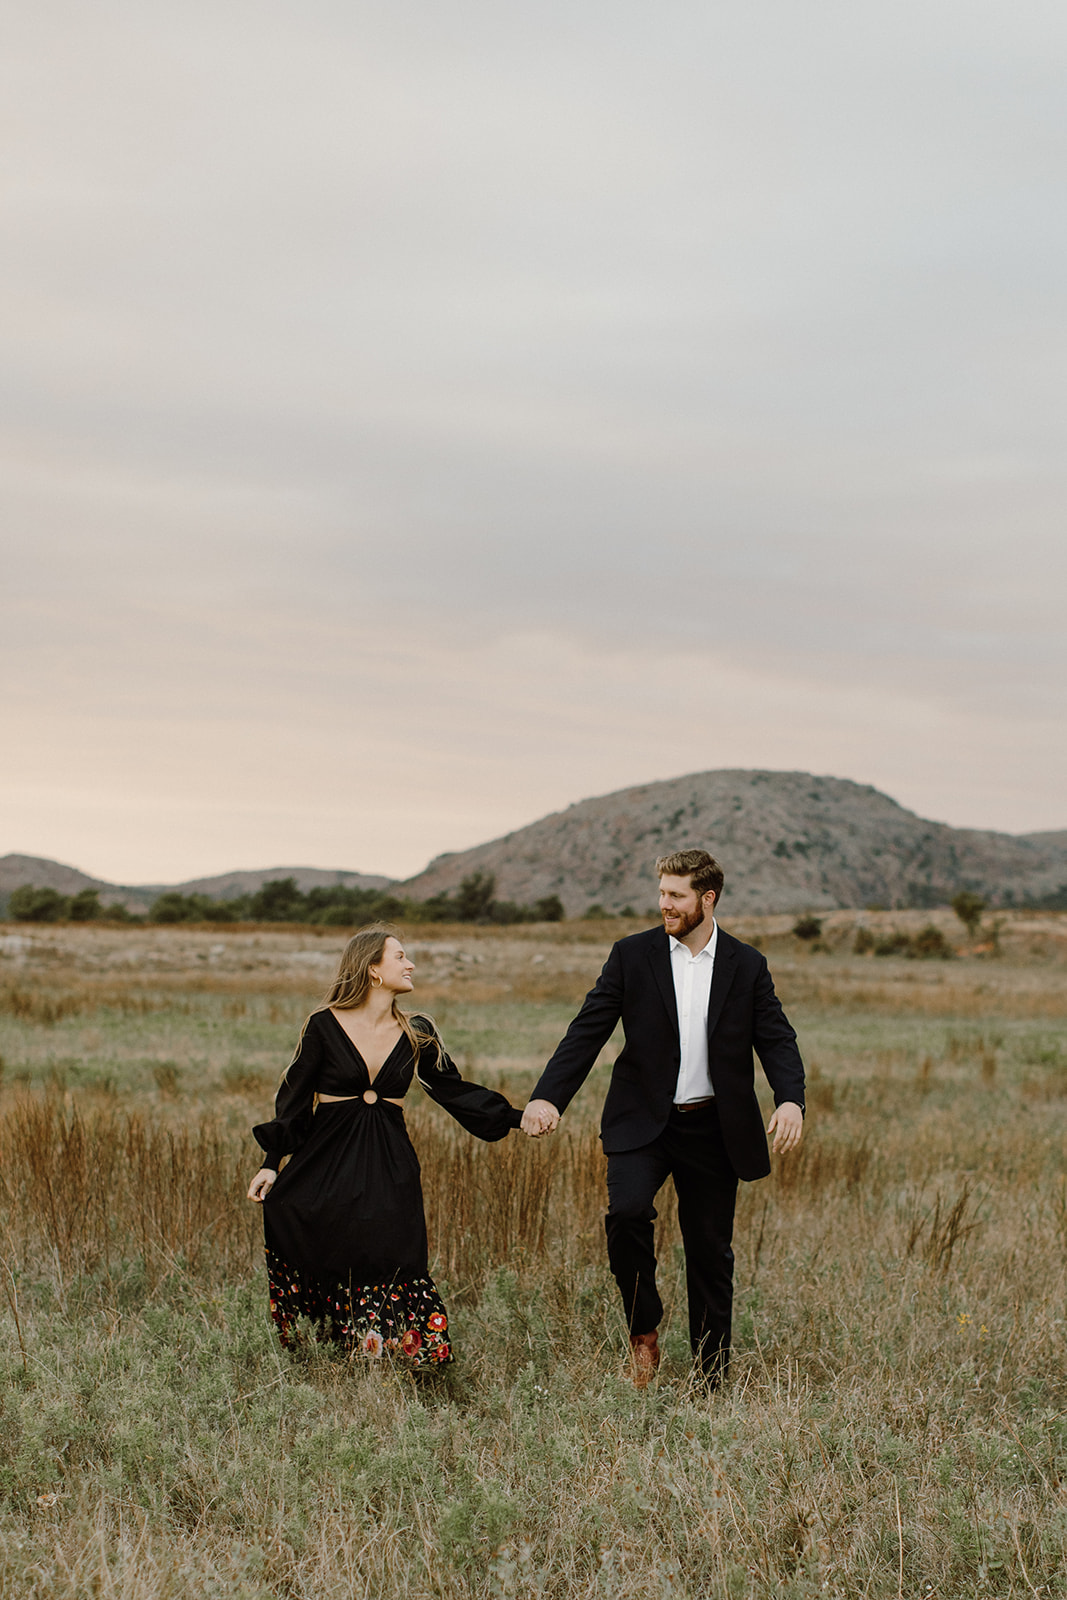 Engagement Session at the Wichita Mountains with a stunning Oklahoma Sunset